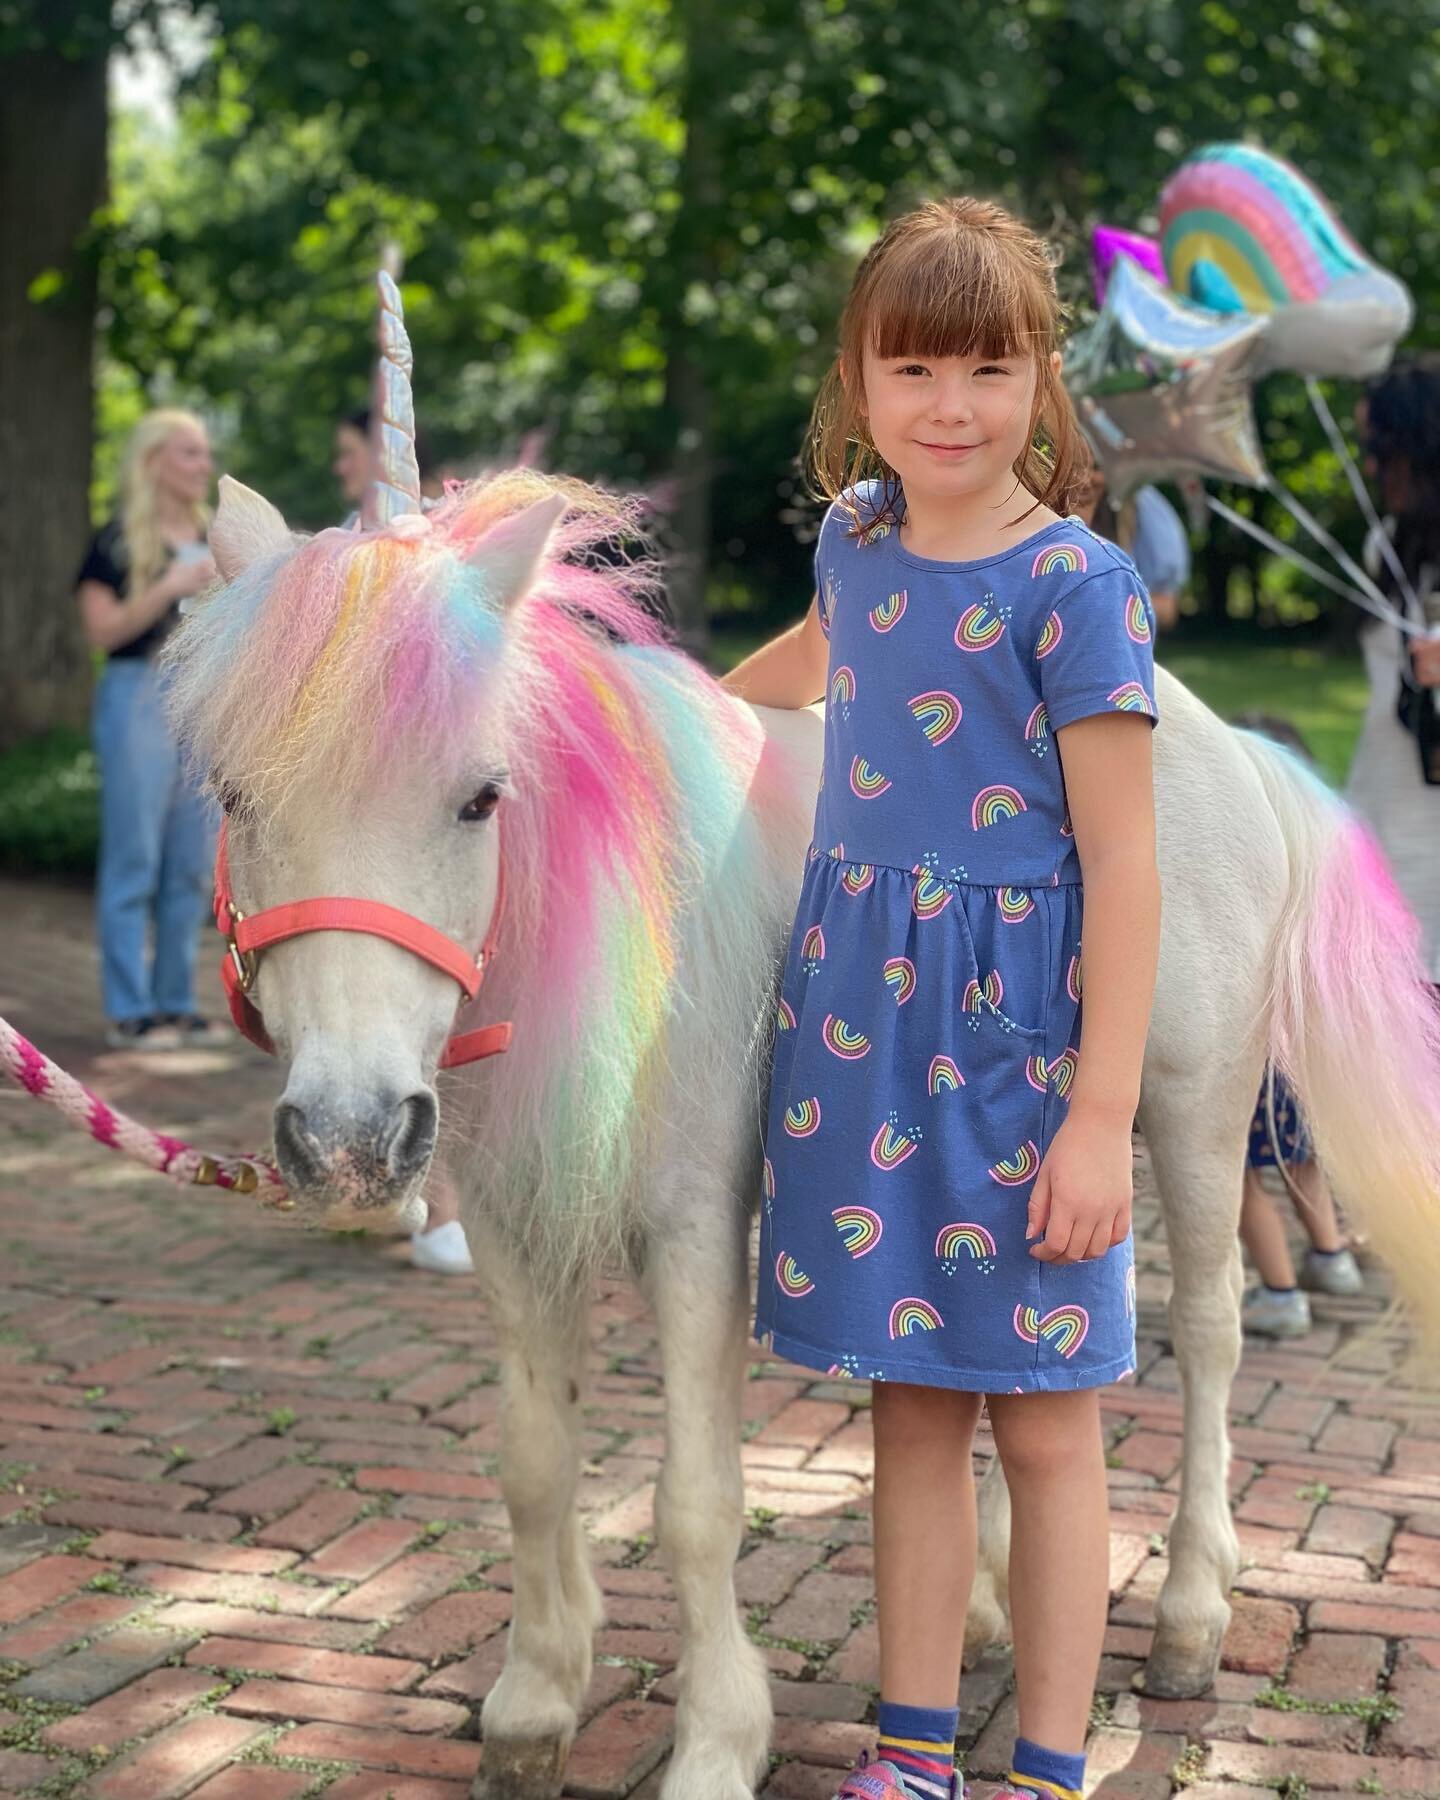 You know it&rsquo;s a good day when getting to meet (and ride!) a unicorn is the SECOND best part of your day. 

The best part? Celebrating our good friend Margot who got to ring the bell today after 798 days in treatment! Turns out we got to see a u